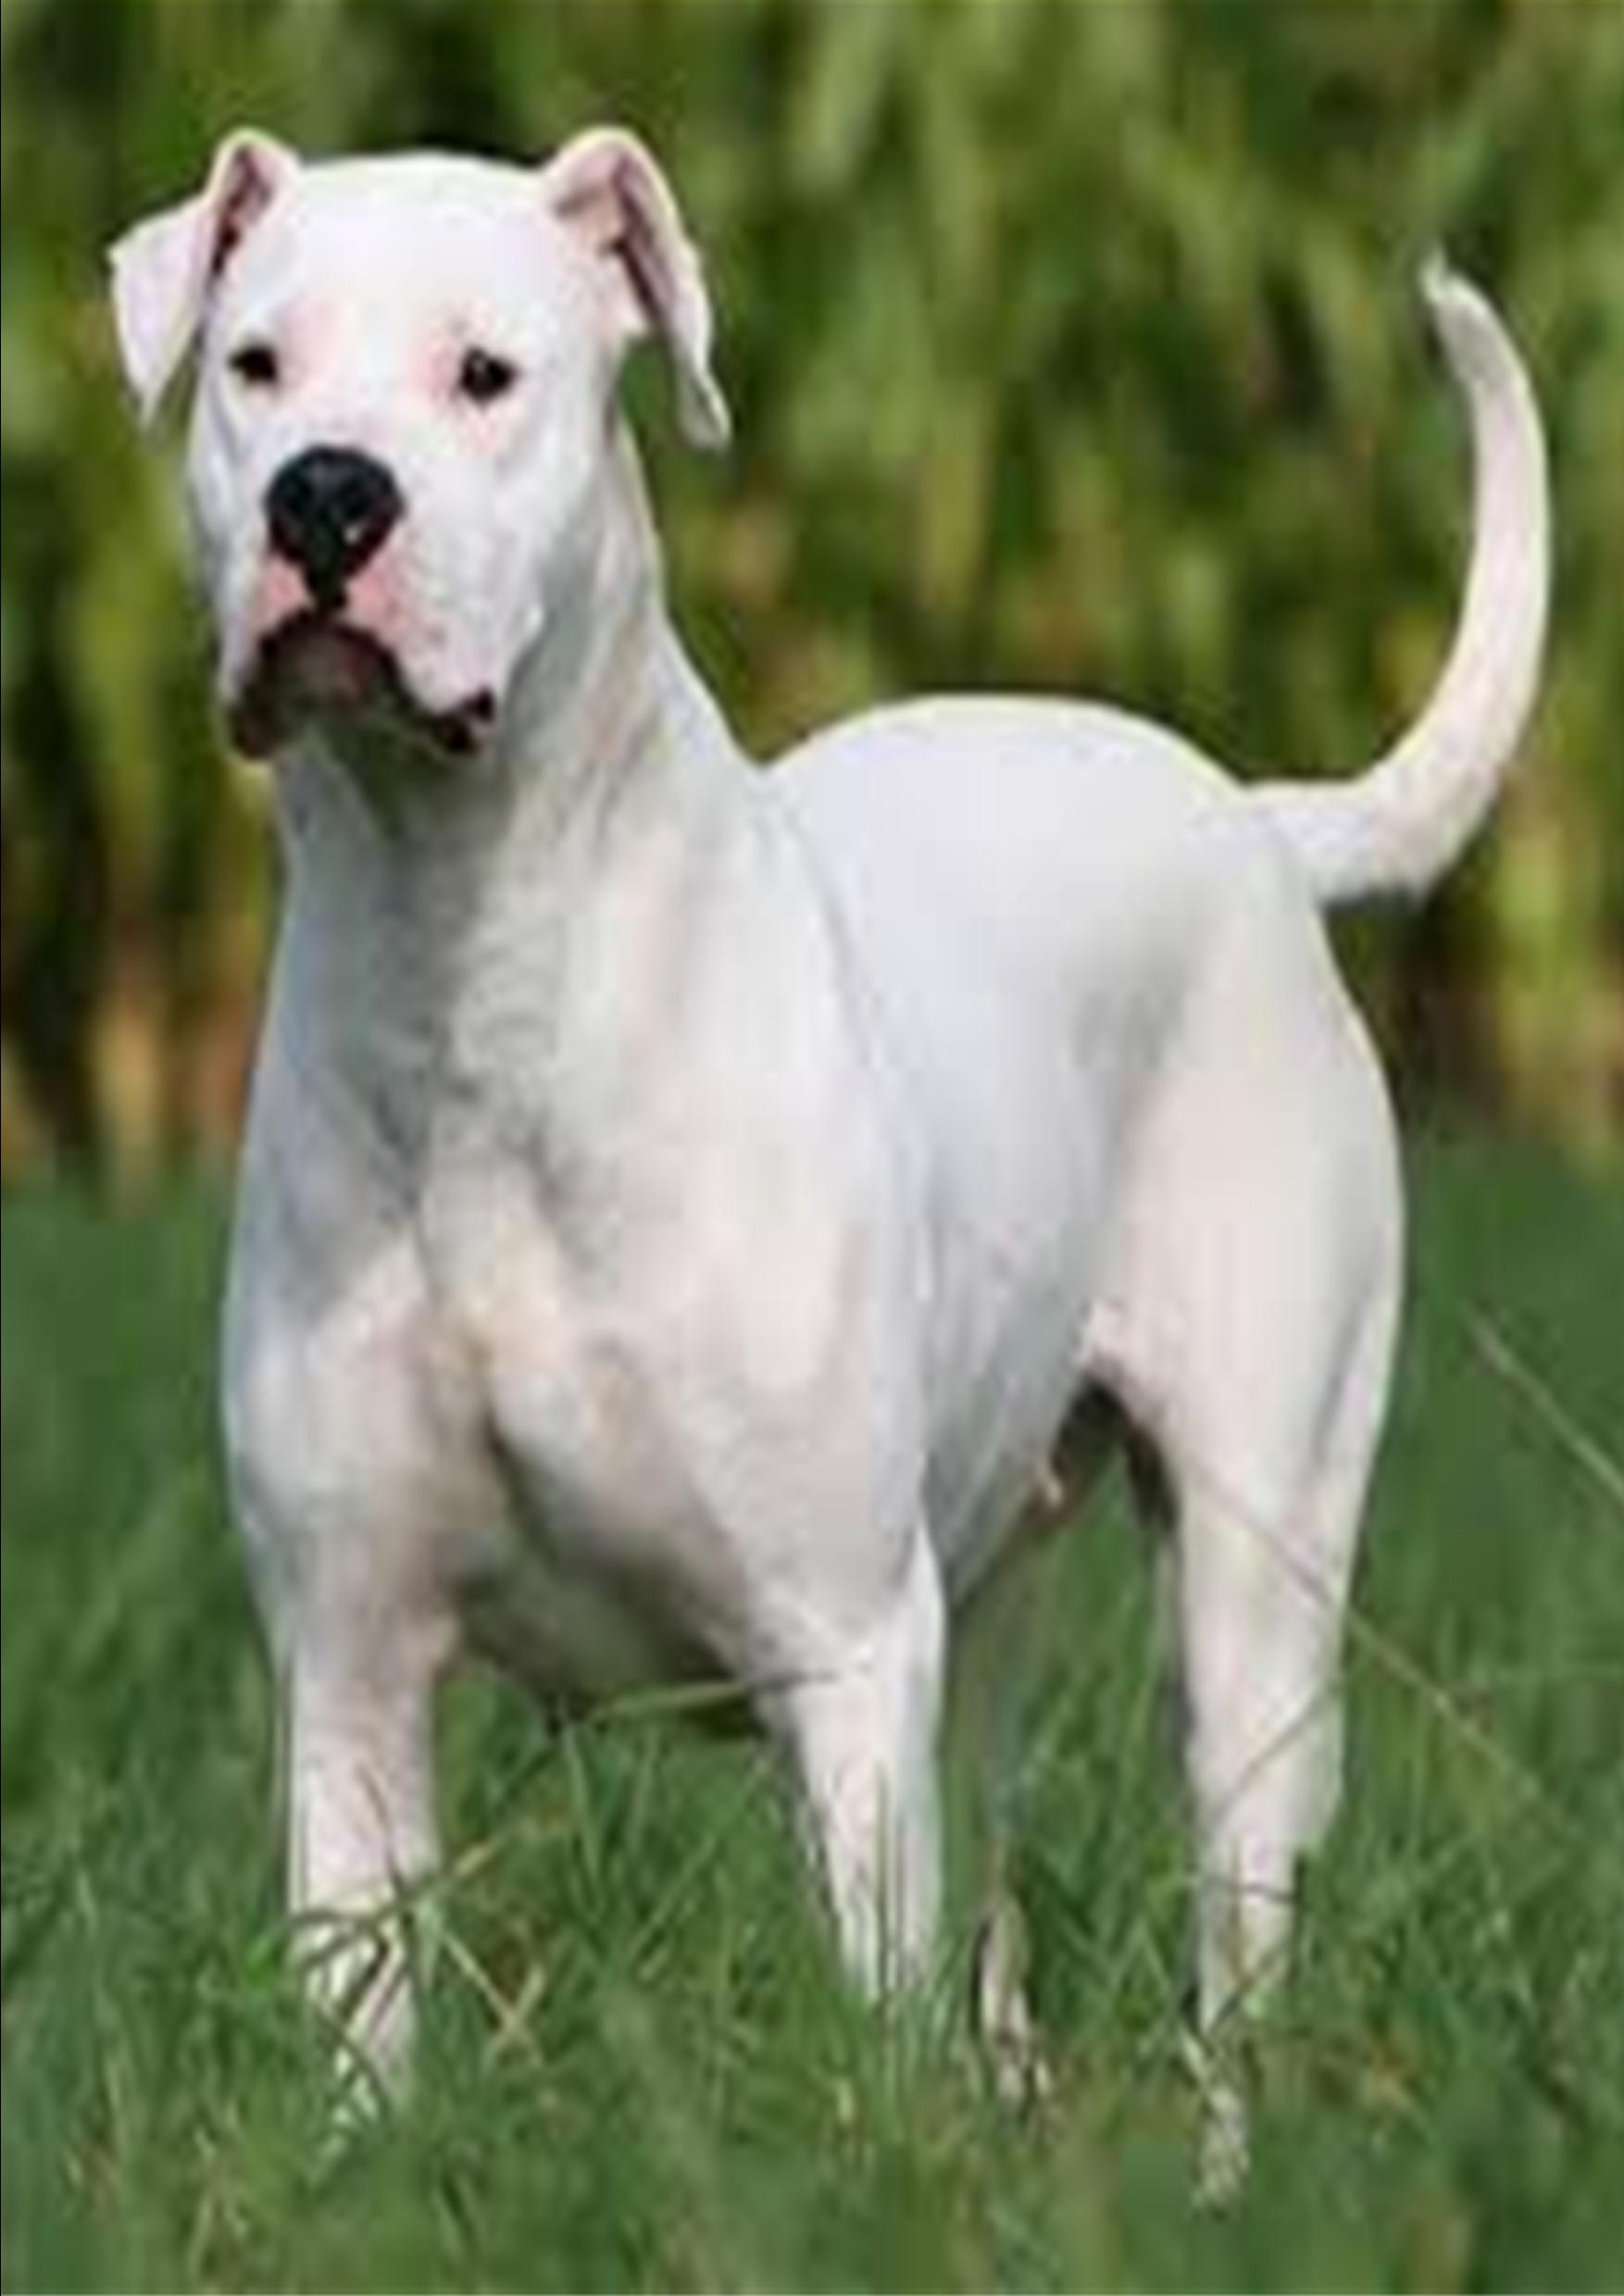 Dogo Argentino images, Pictures and Photos, Pictures of Dogo Argentino , Dogo Argentino images free, Images of Dogo Argentino 